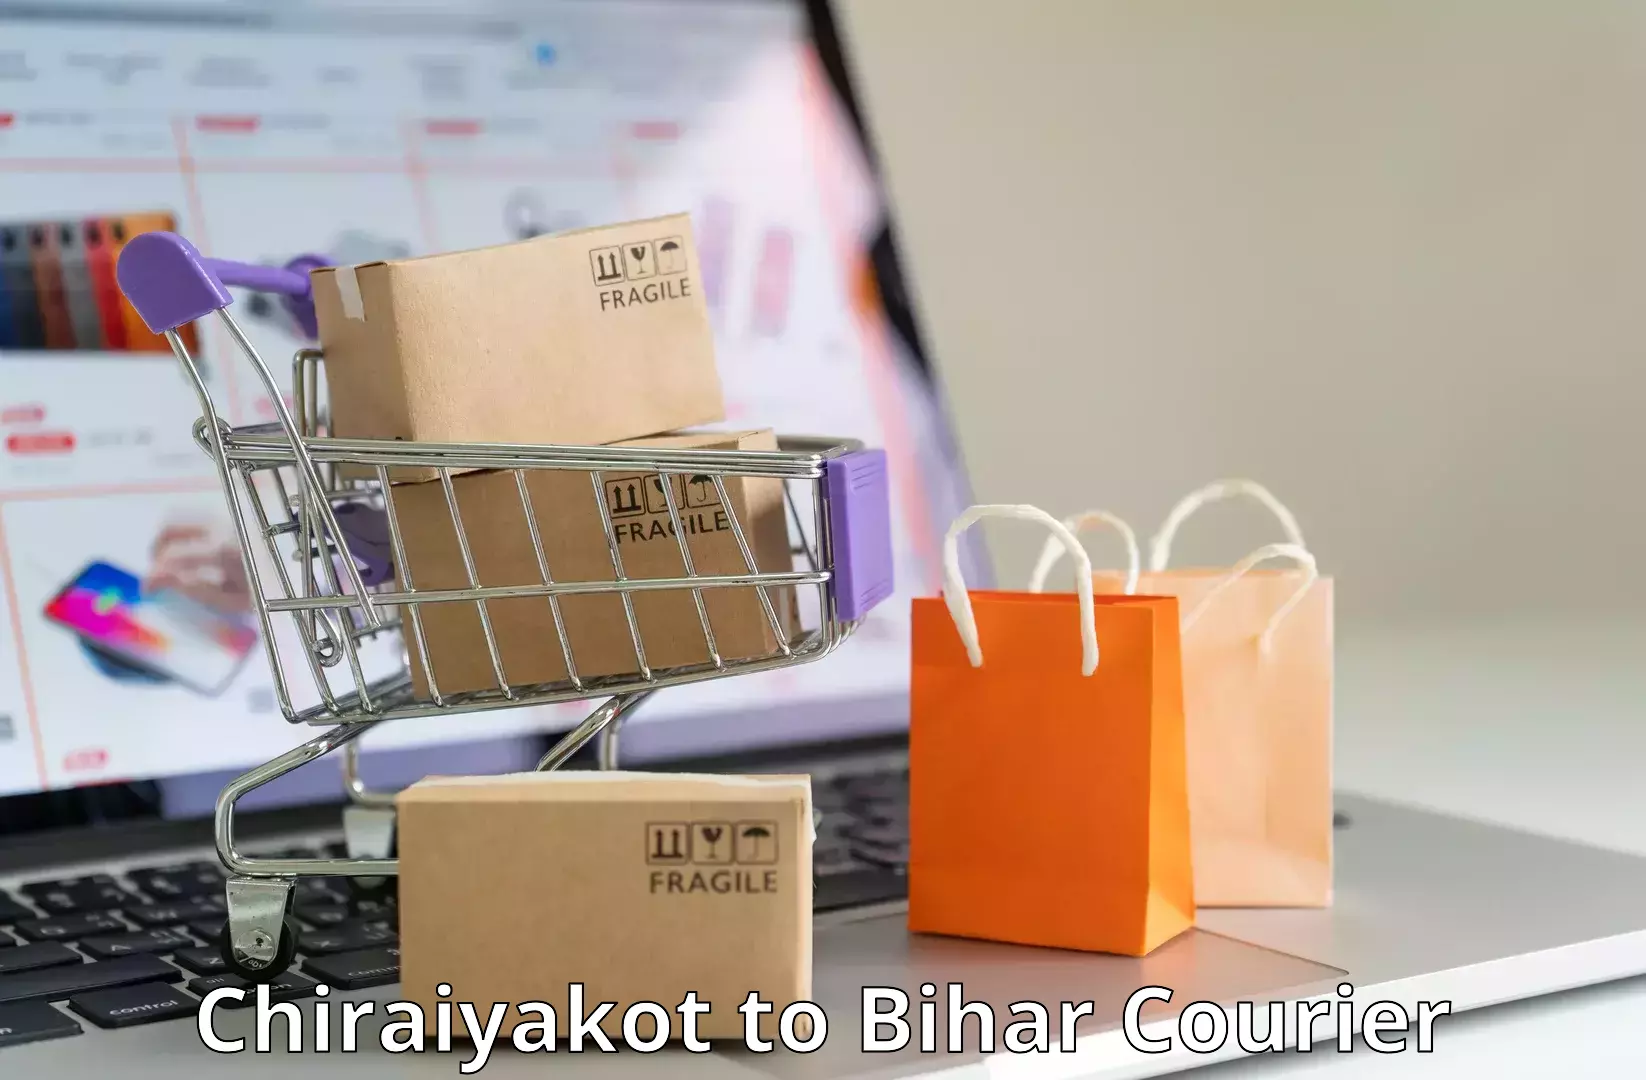 Package delivery network Chiraiyakot to Baniapur